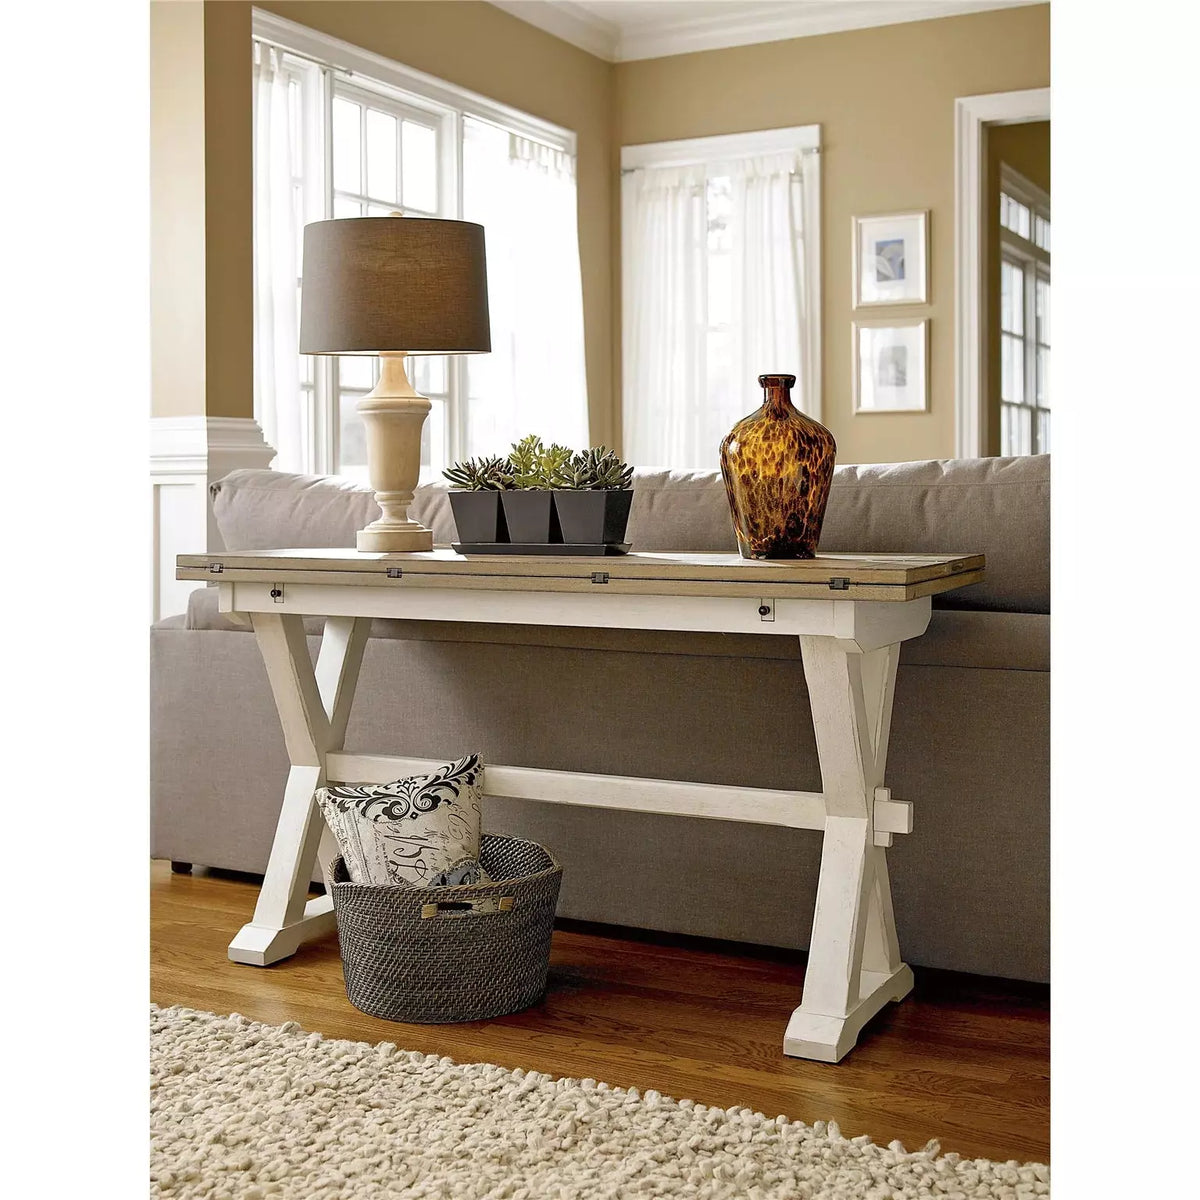 Drop Leaf Console Table - Be Bold Furniture